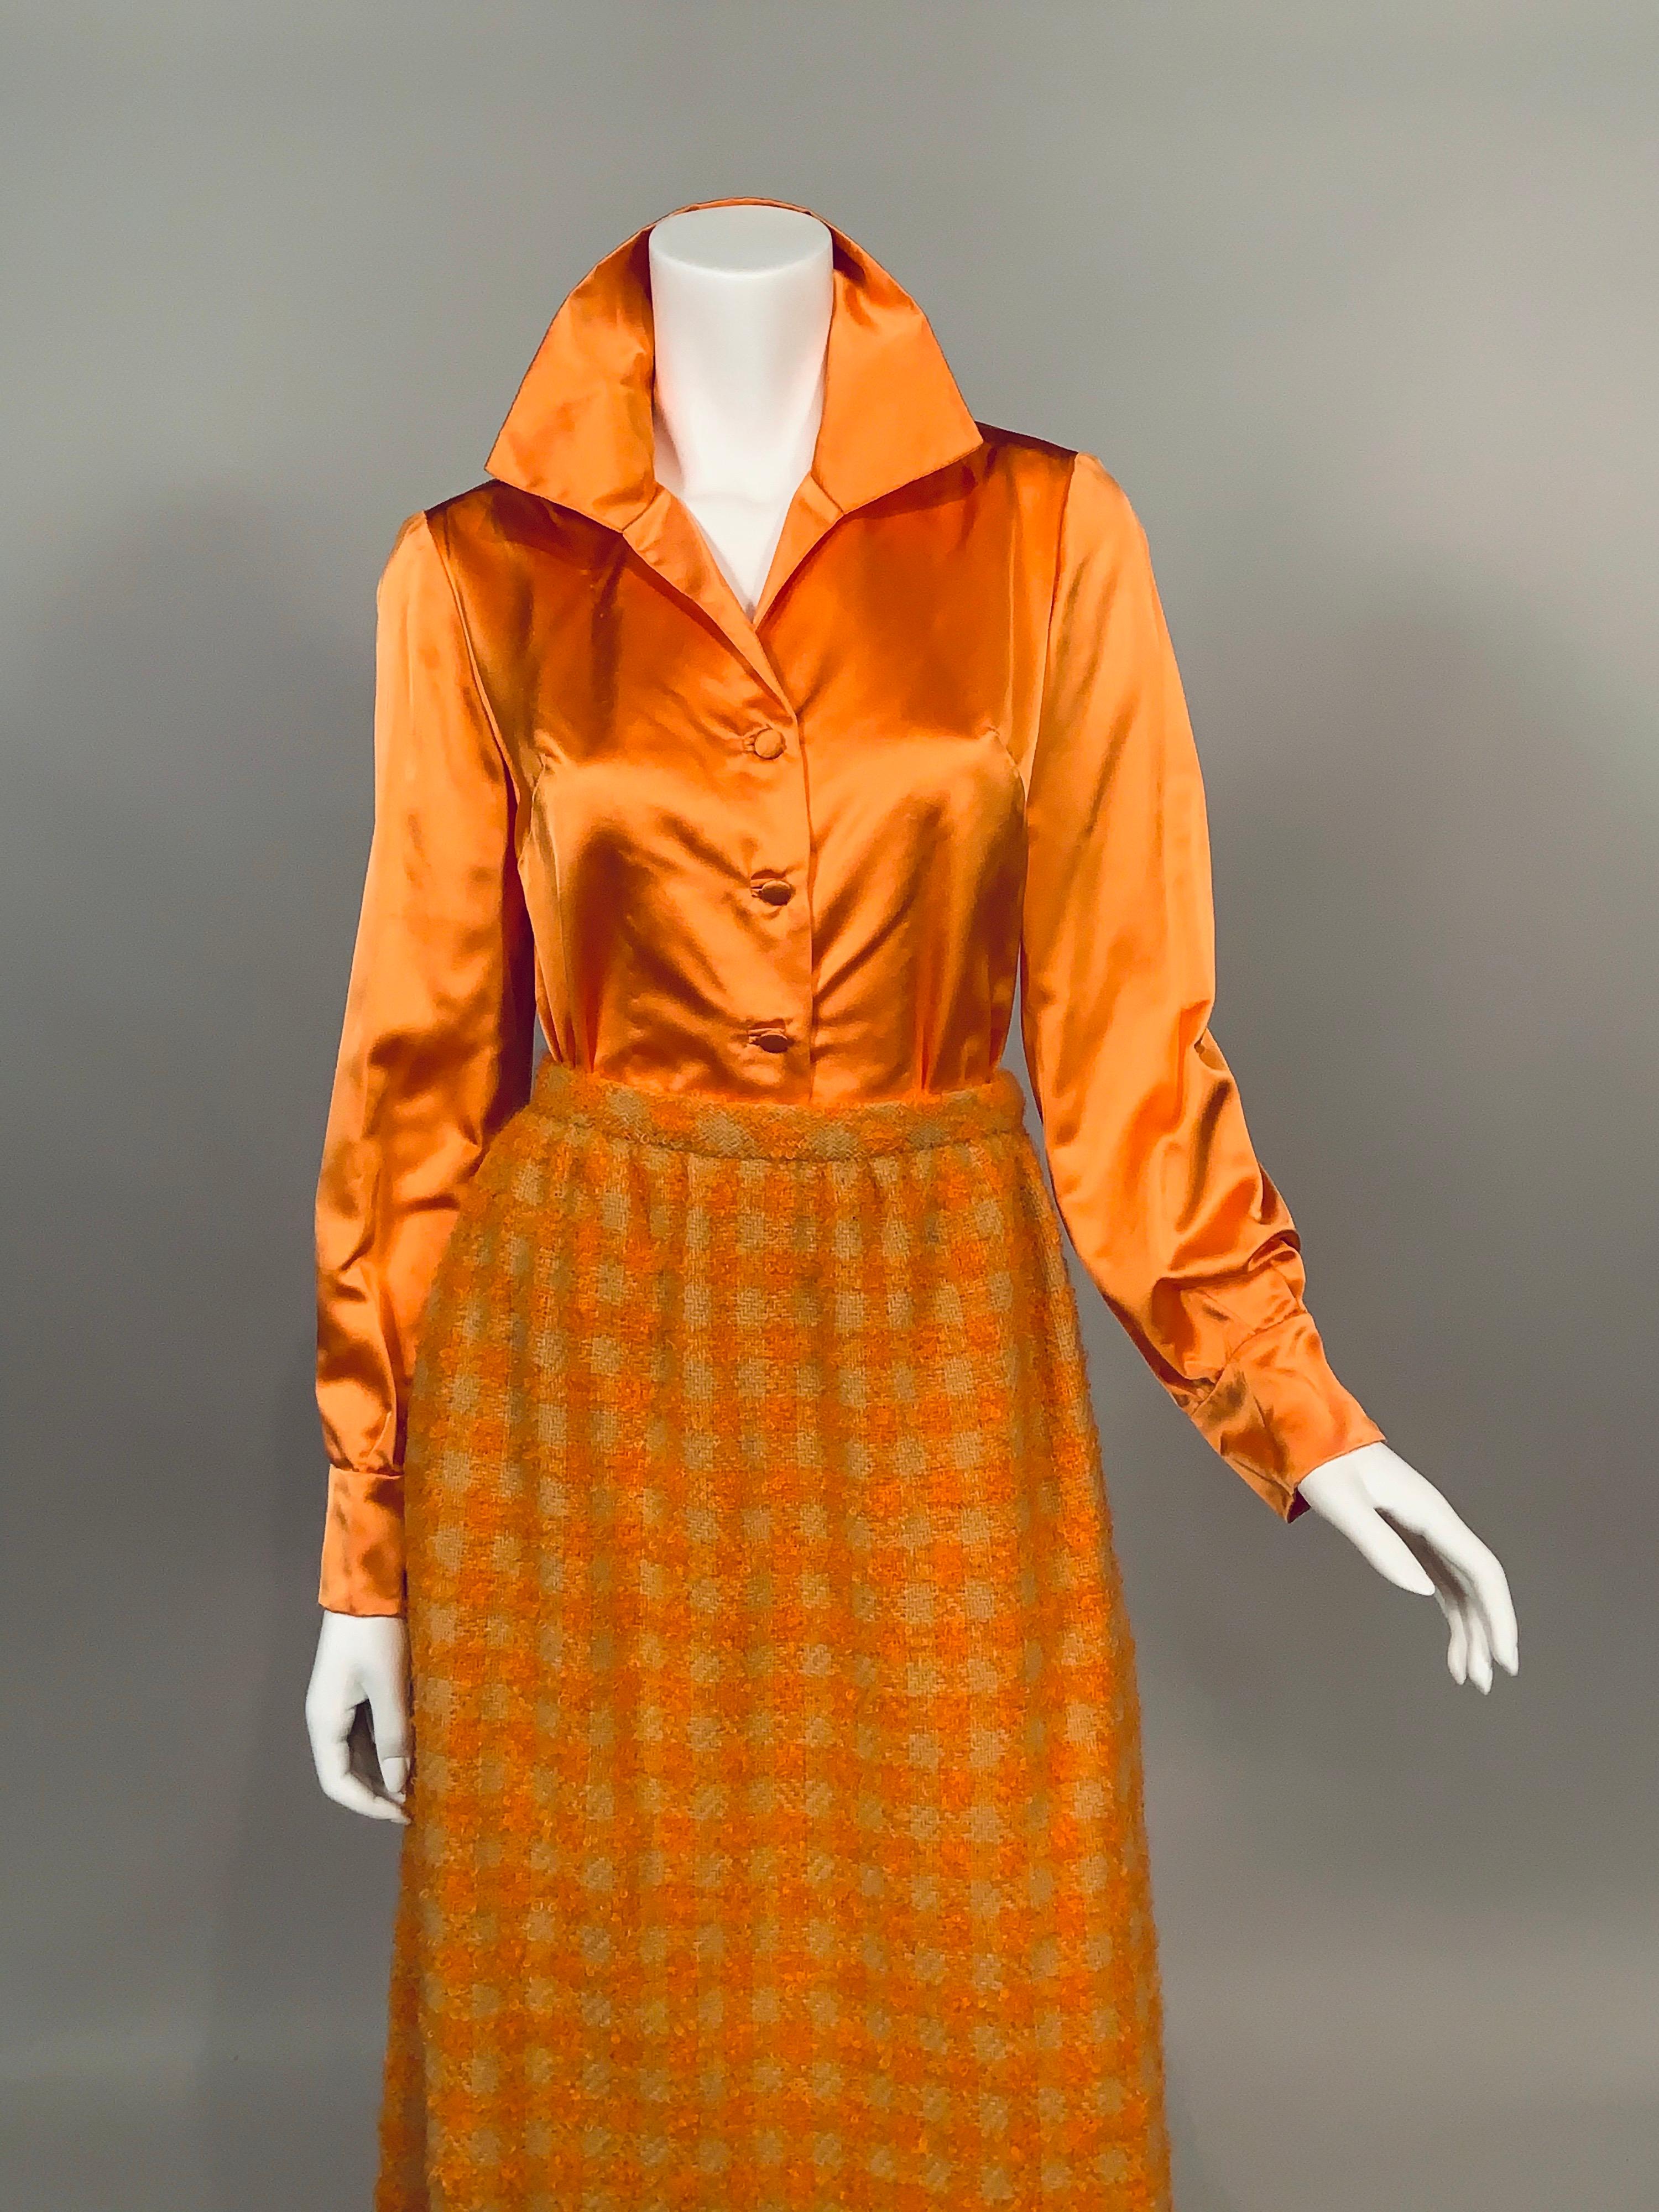 Sybil Connolly is a well known Irish Couturier. Jacqueline Kennedy wore one of her designs for her official White House portrait. Her work is exquisite, and she often used fabrics and laces from her native Ireland for her couture designs.  This two